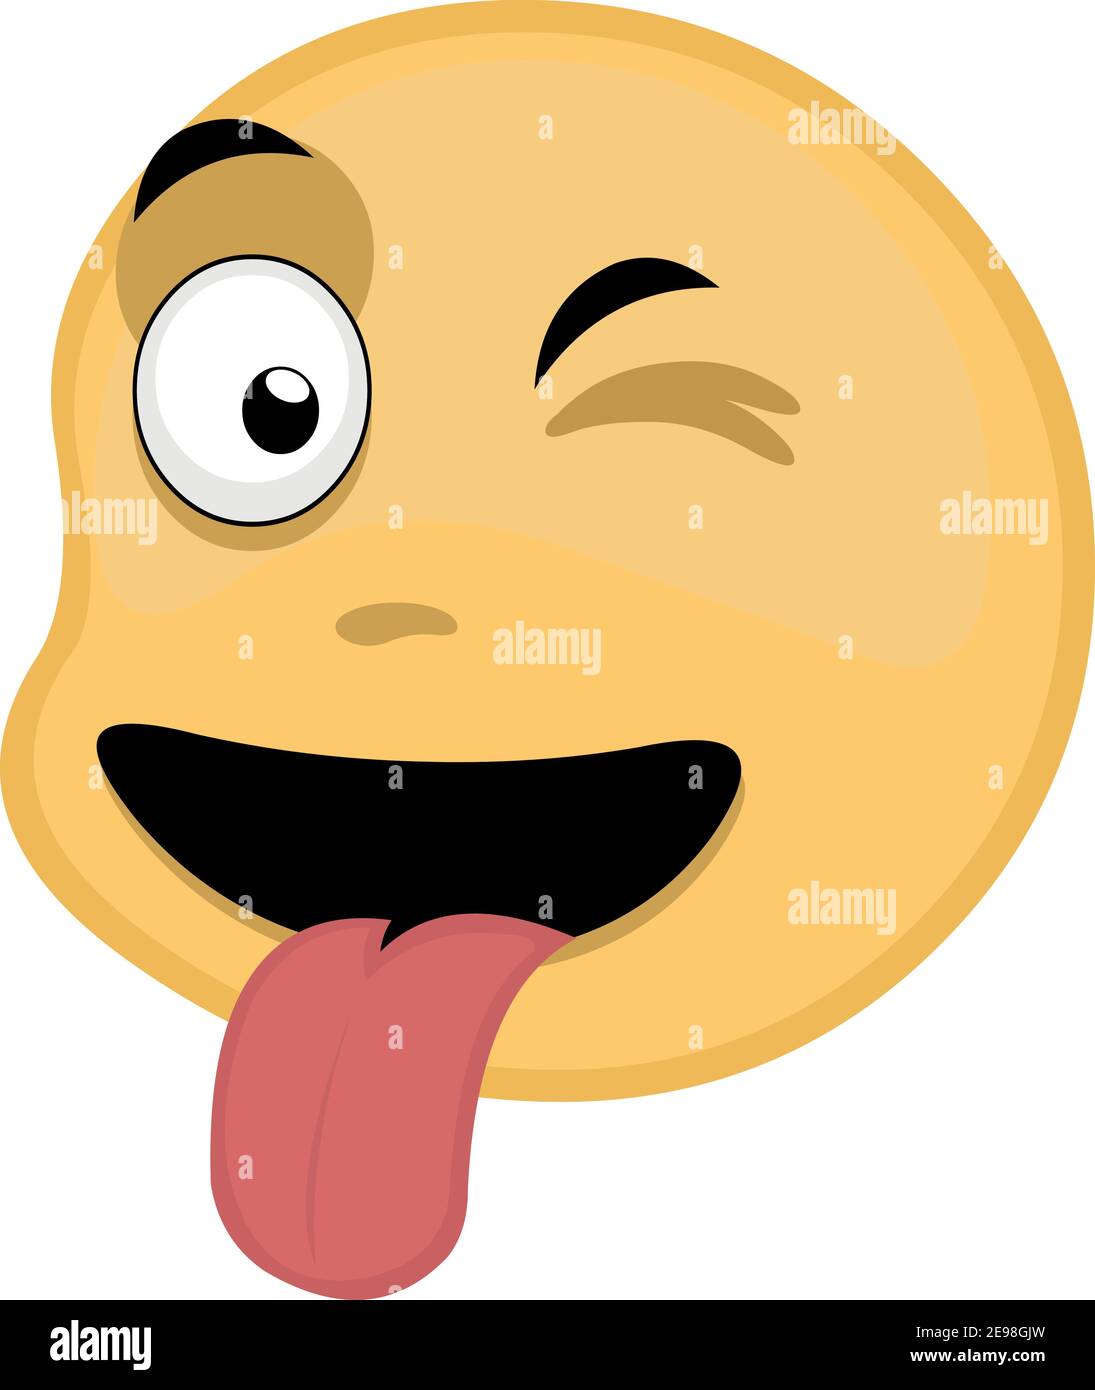 Vector illustration of emoticon with a mocking expression Stock Vector